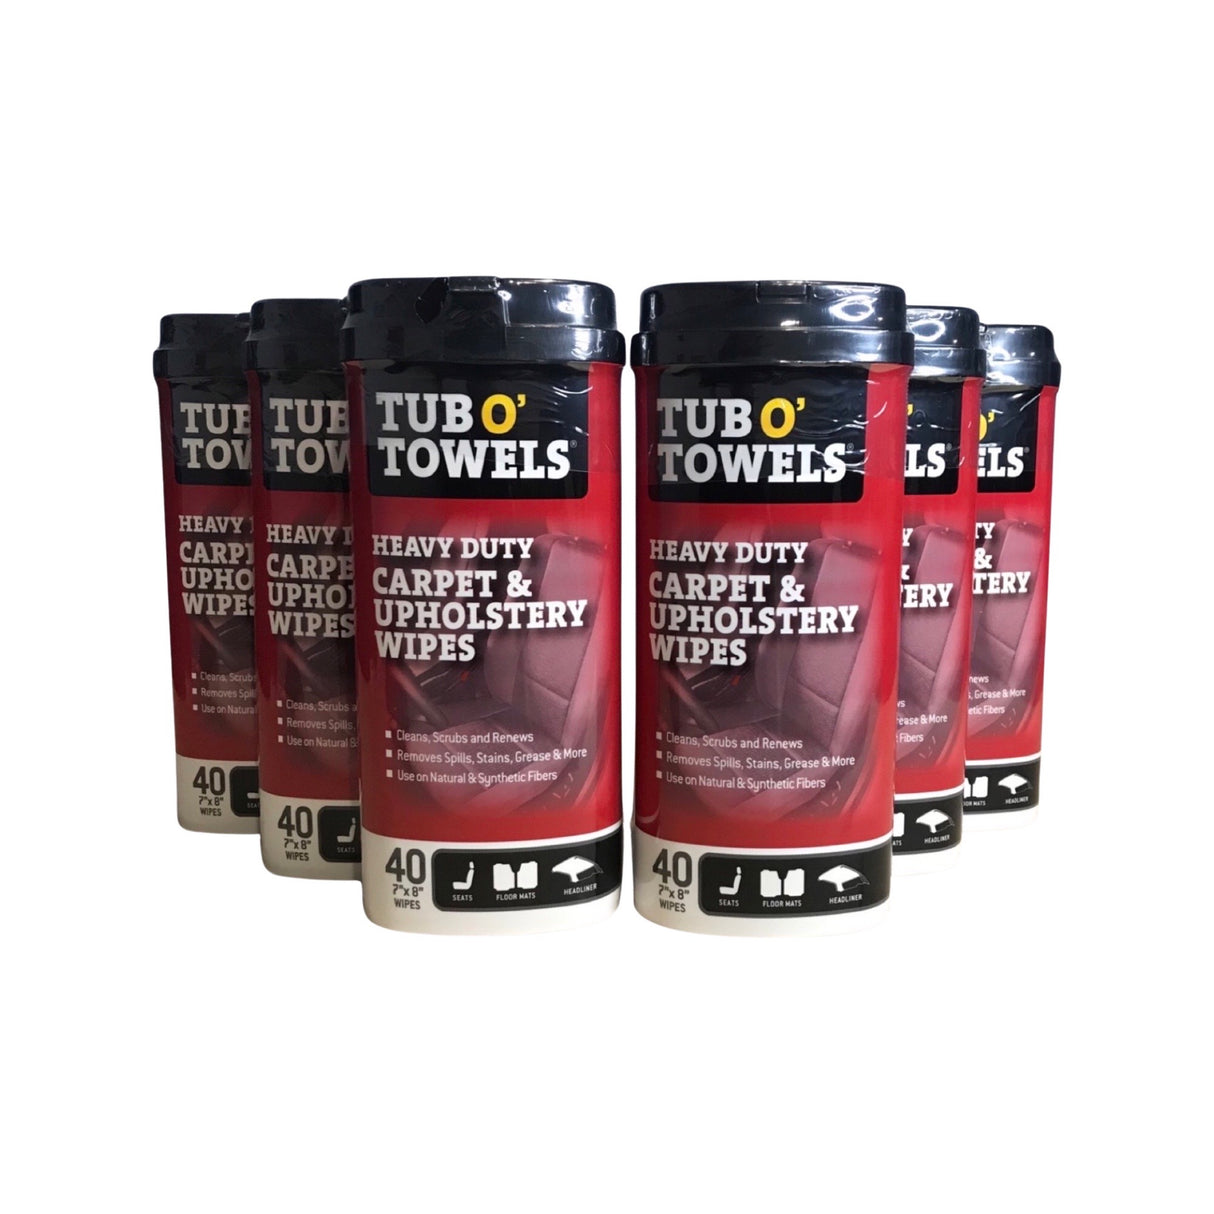 Tub O' Towels TW40-CPA - 6 Pack Heavy Duty Carpet & Upholstery Automotive Wipes